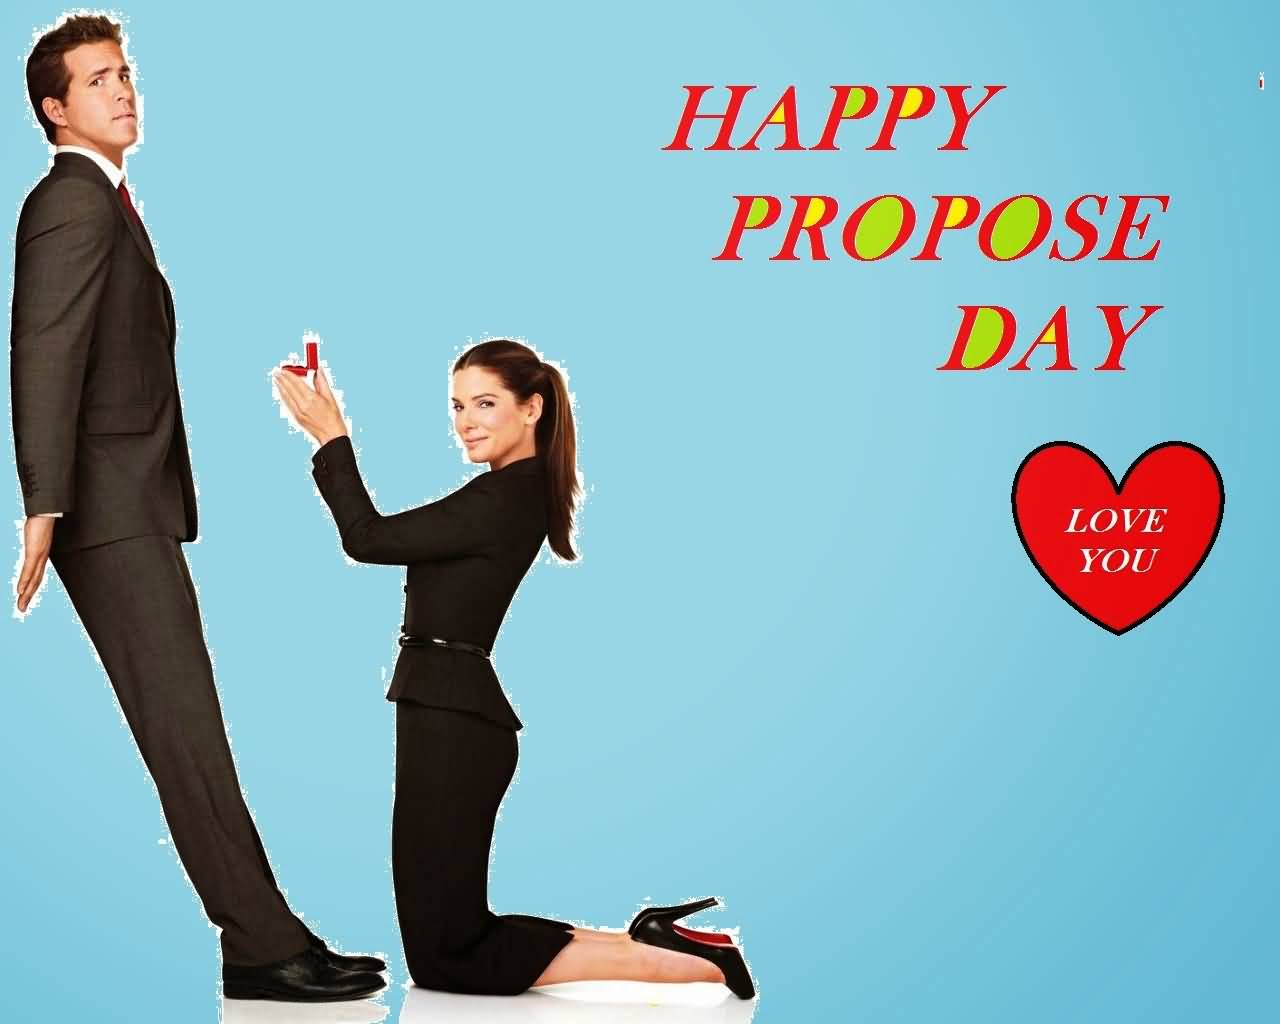 Happy Propose Day Love You Girl Proposing Boy